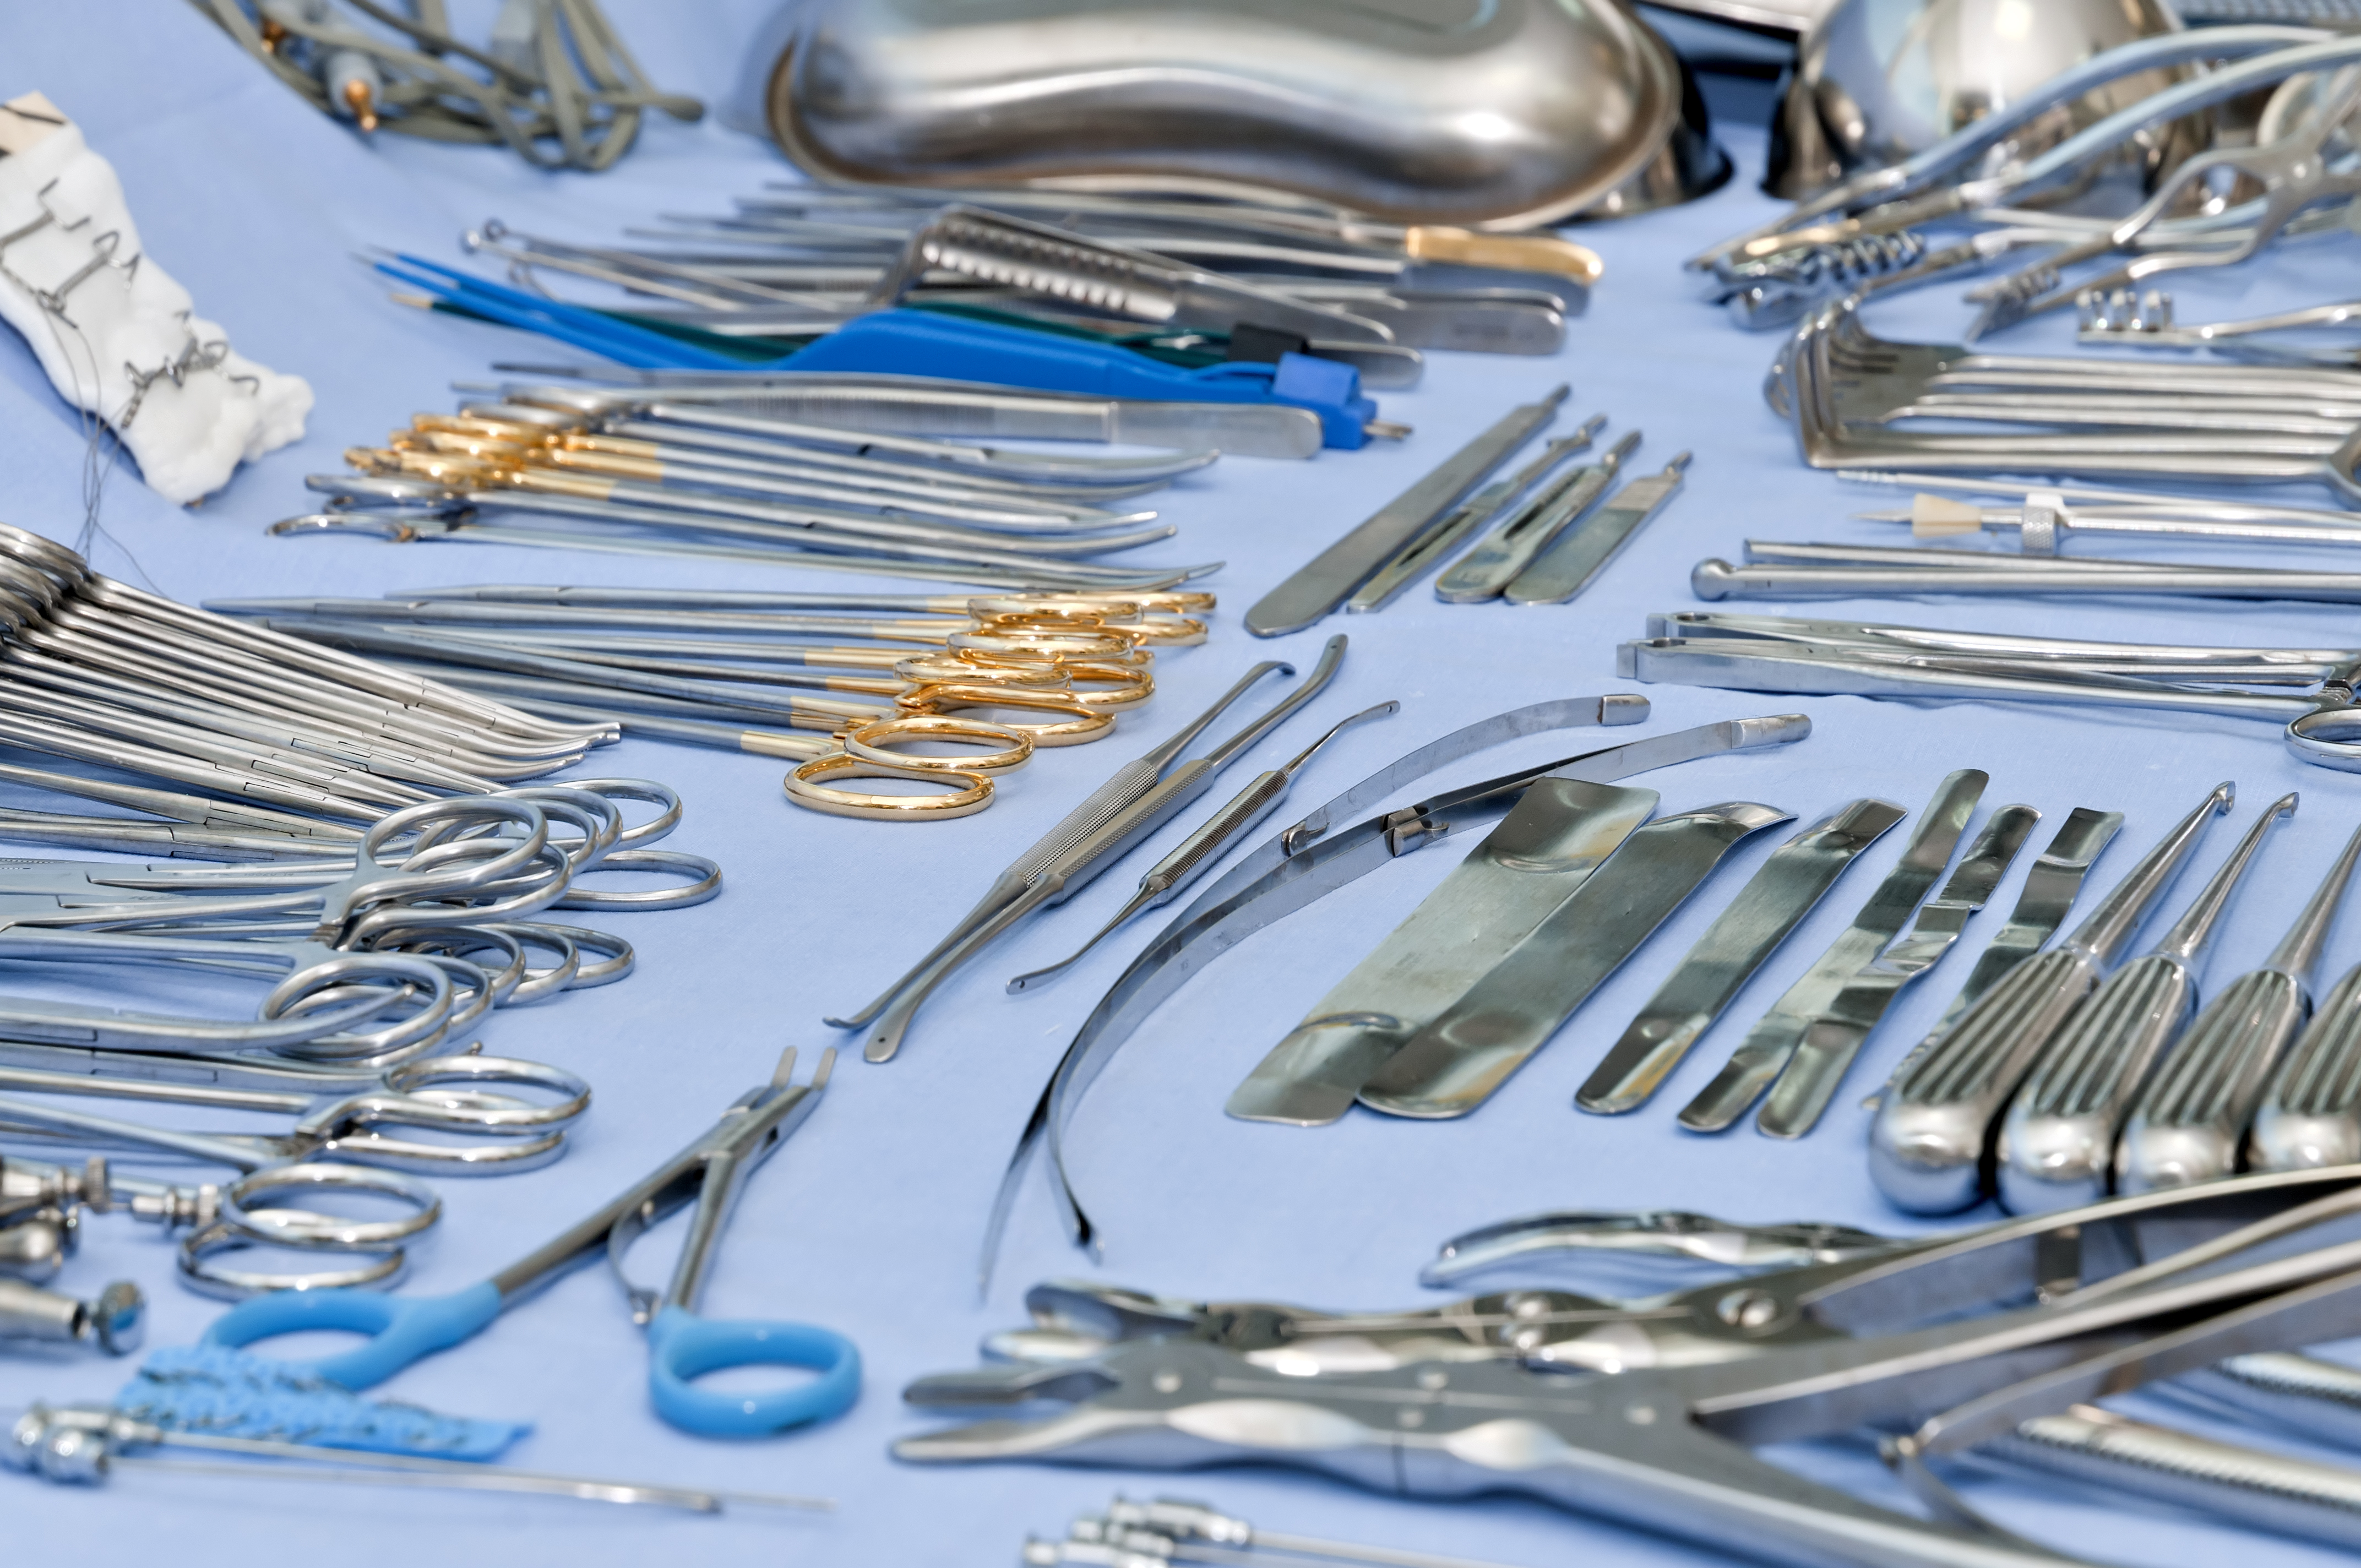 Maximizing the Lifespan of Your Surgical Instruments and Devices